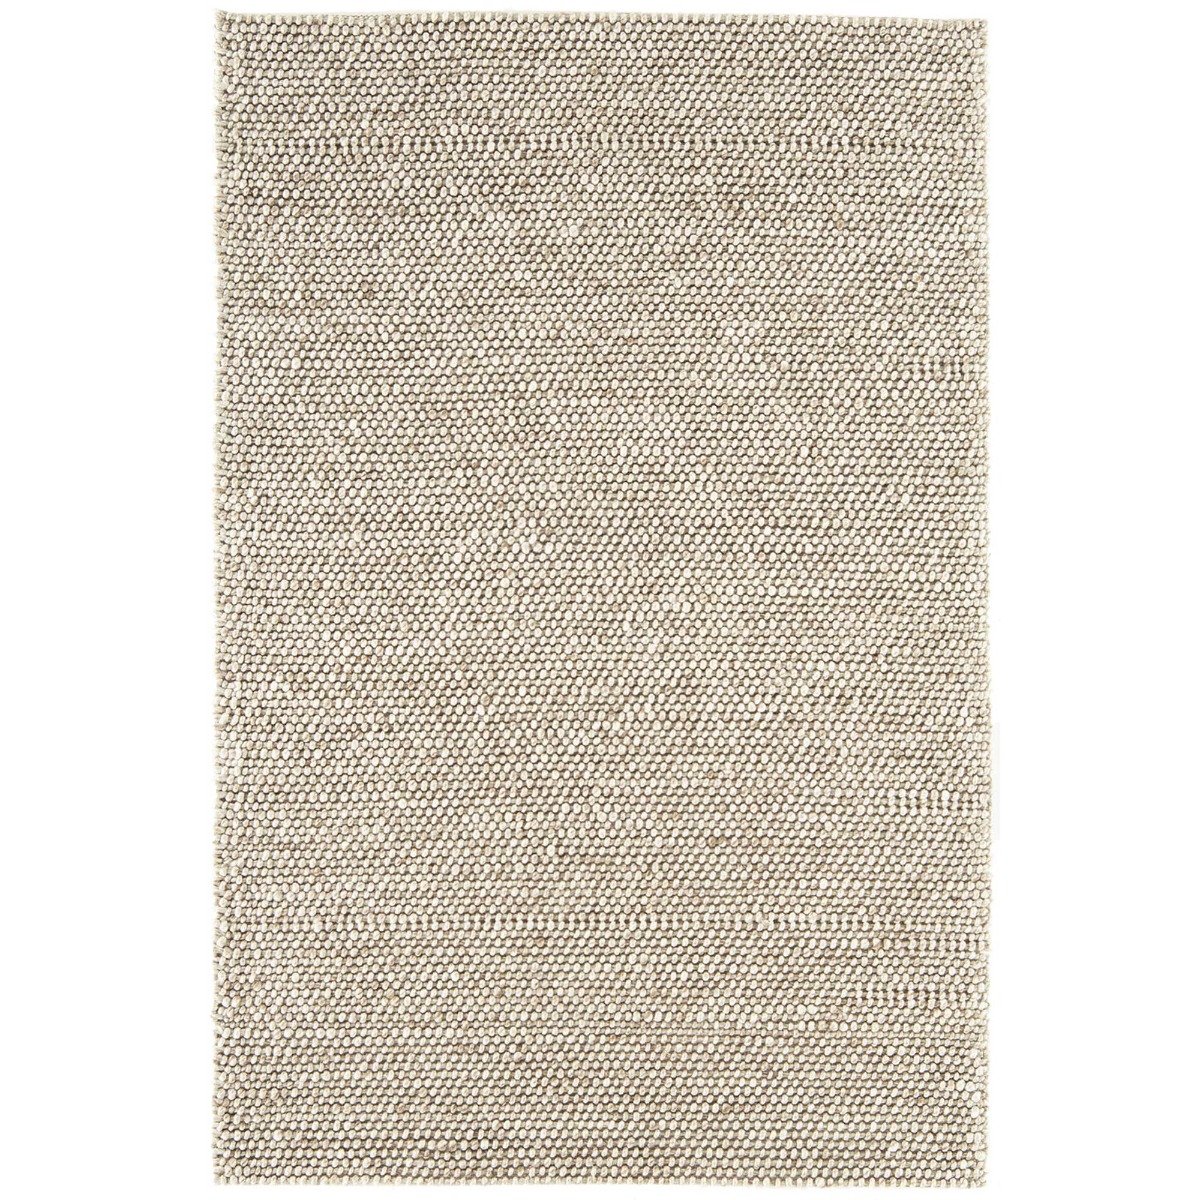 Flori Woven Oyster 120x170cm Rug, Square | W120cm | Barker & Stonehouse